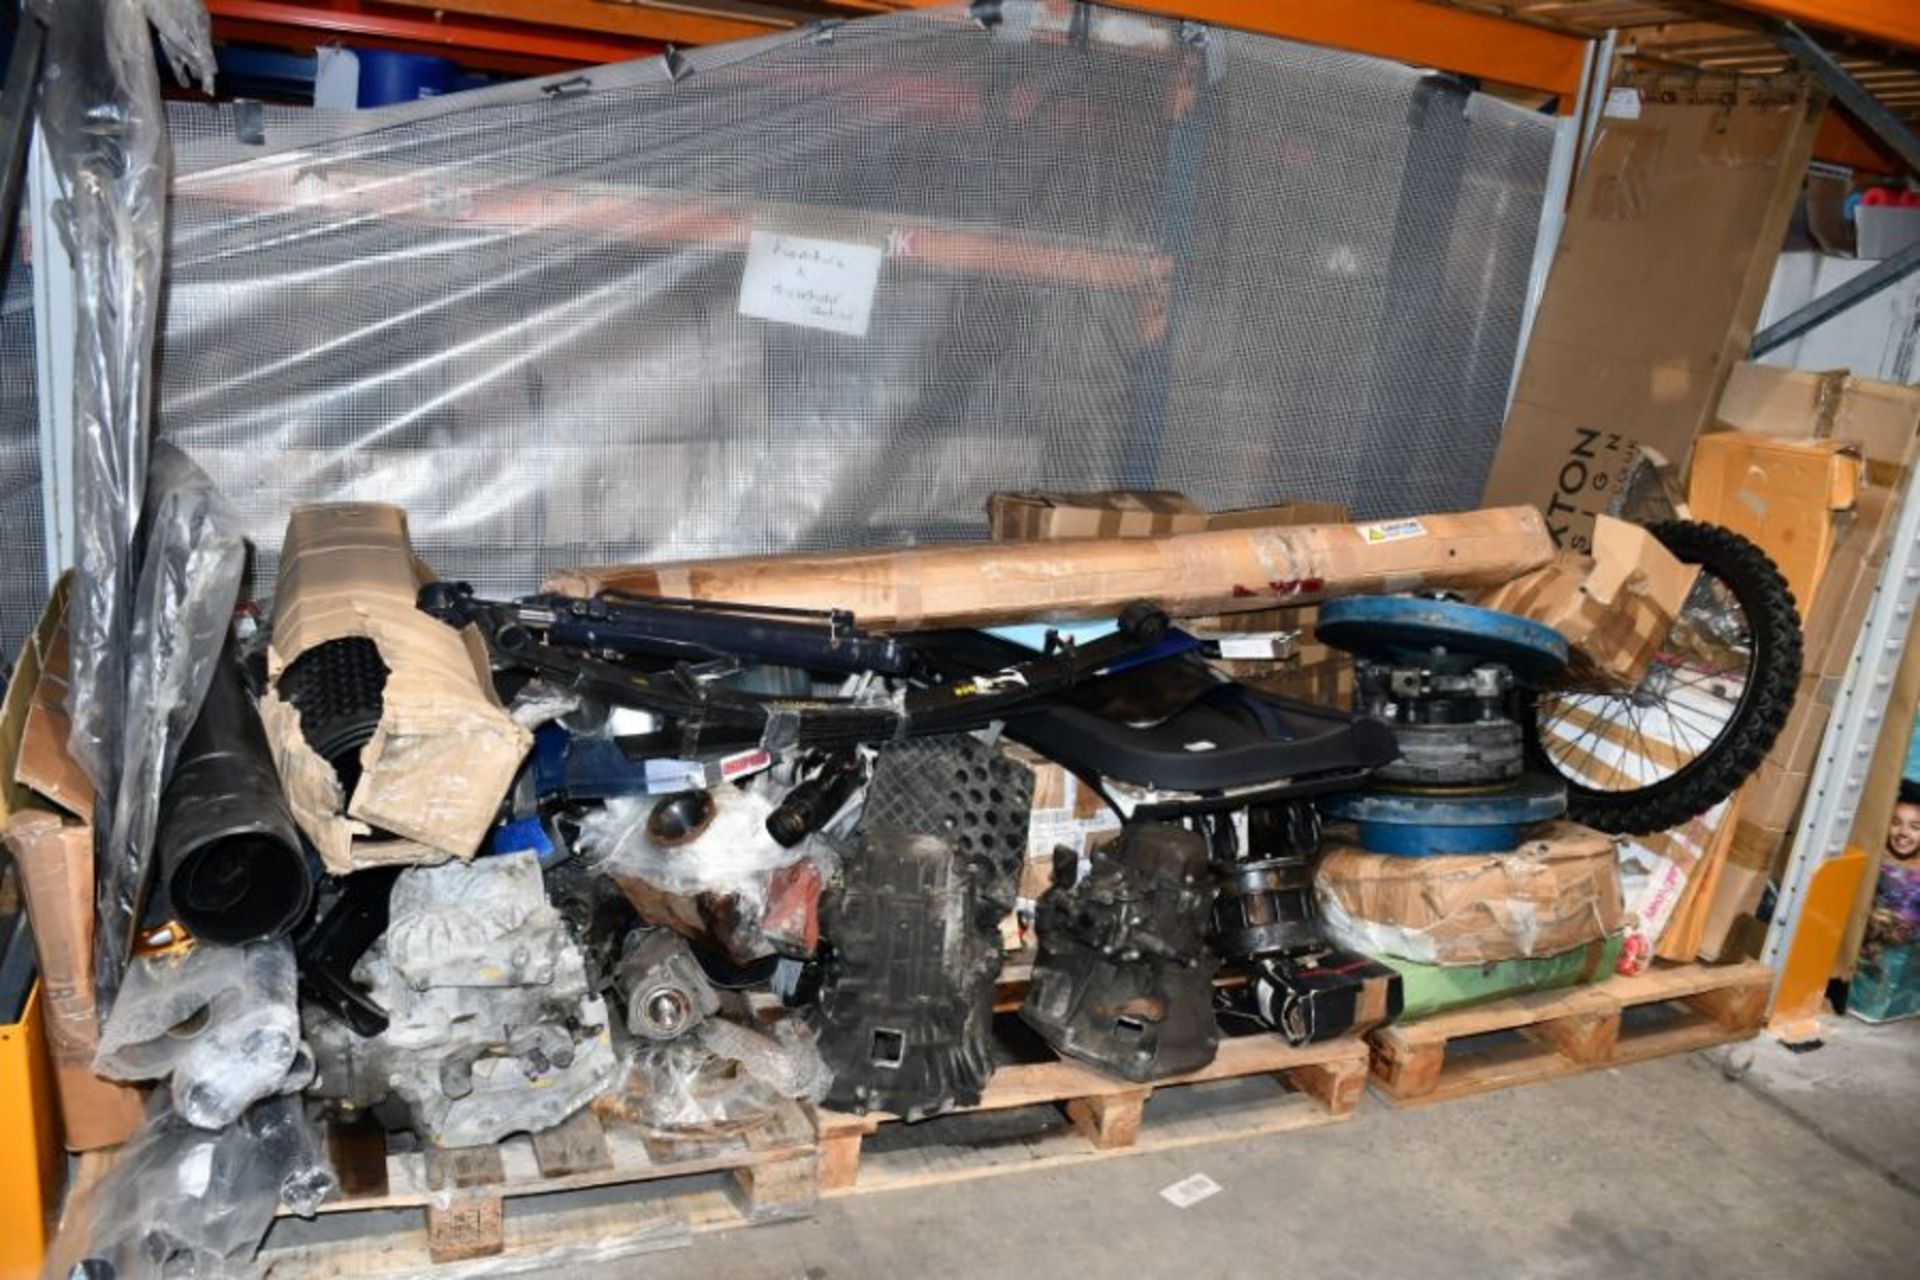 Three pallets of automotive parts and related items